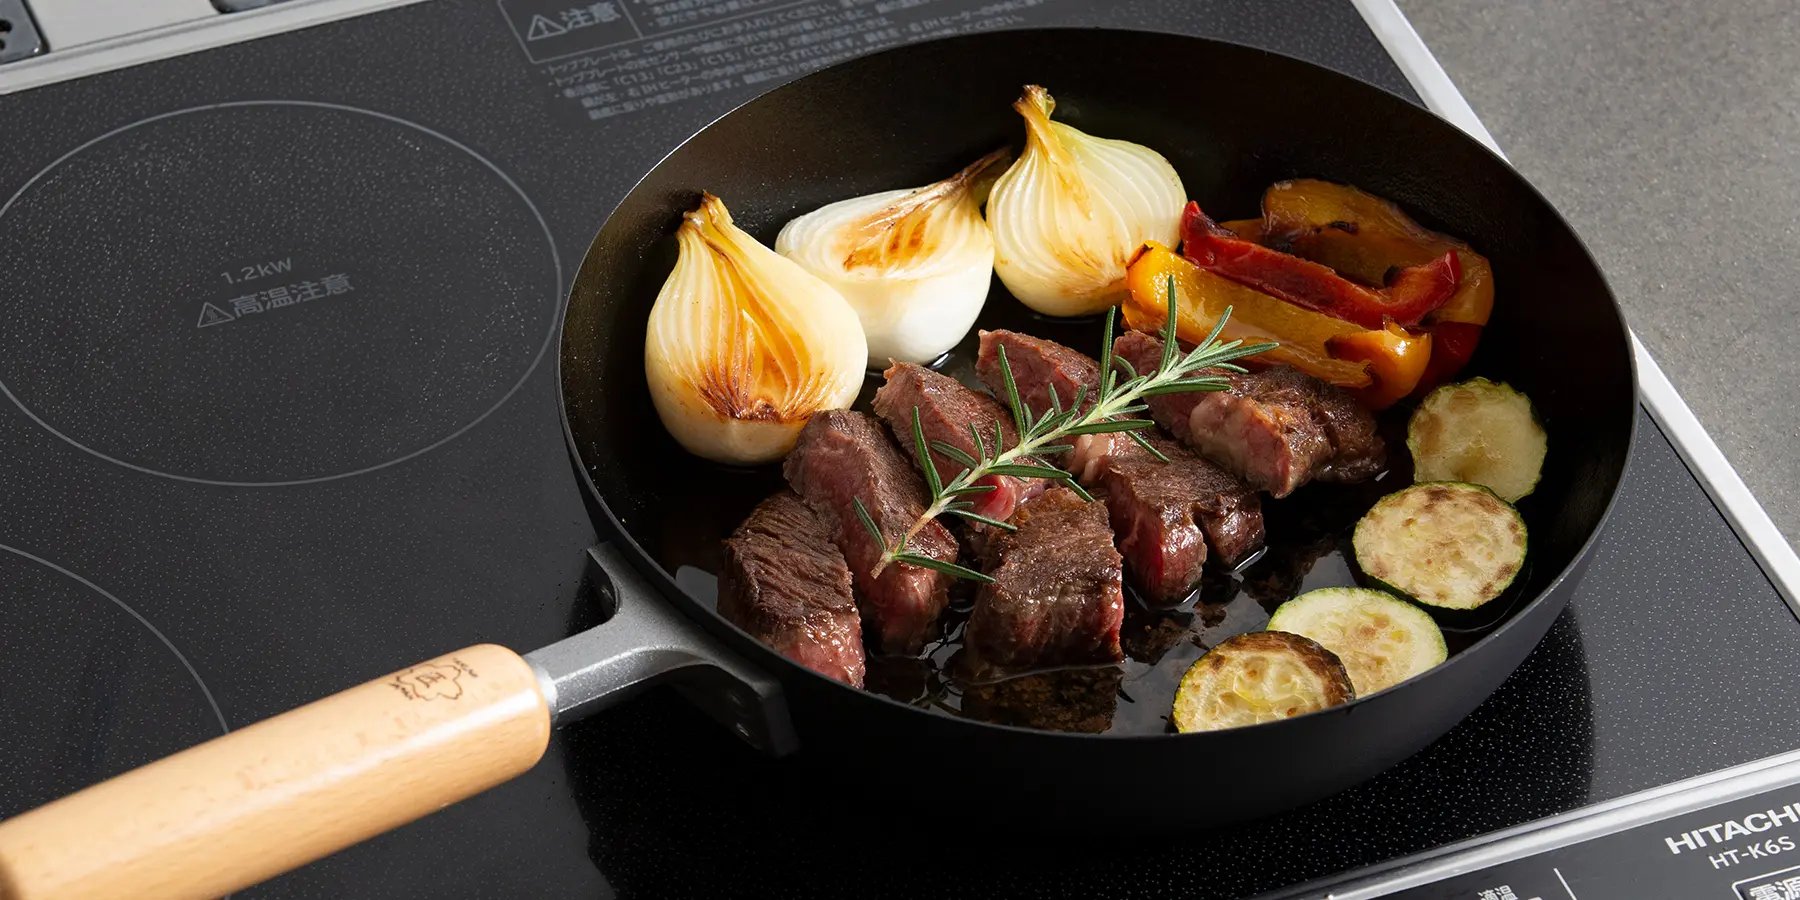 Discover our great selection of Induction Ready Cookware at Globalkitchen Japan.